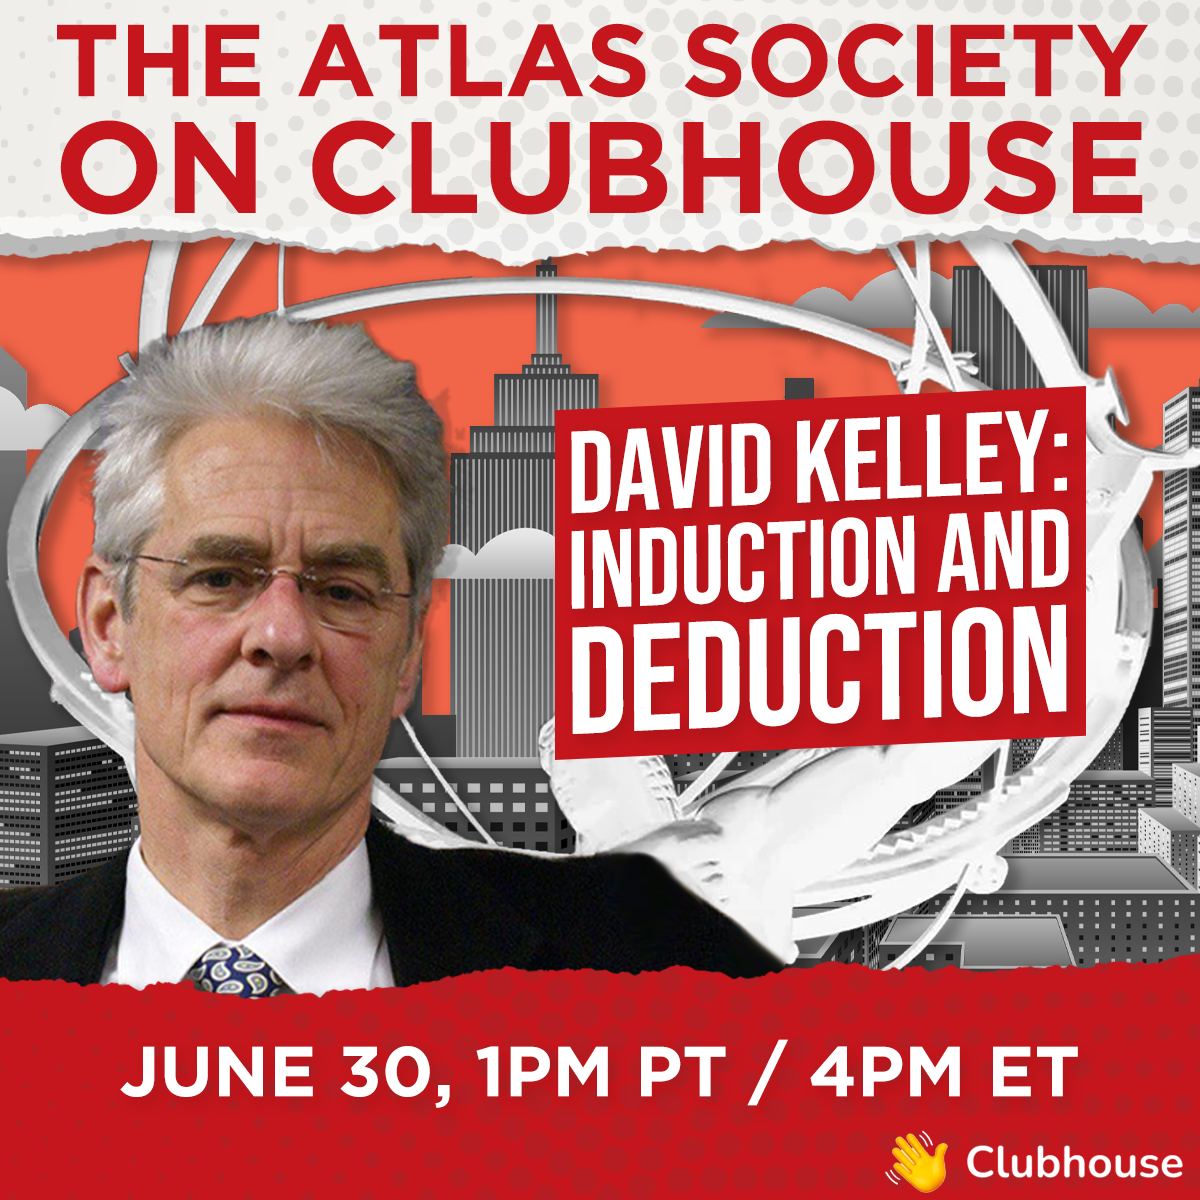 David Kelley - Induction and Deduction